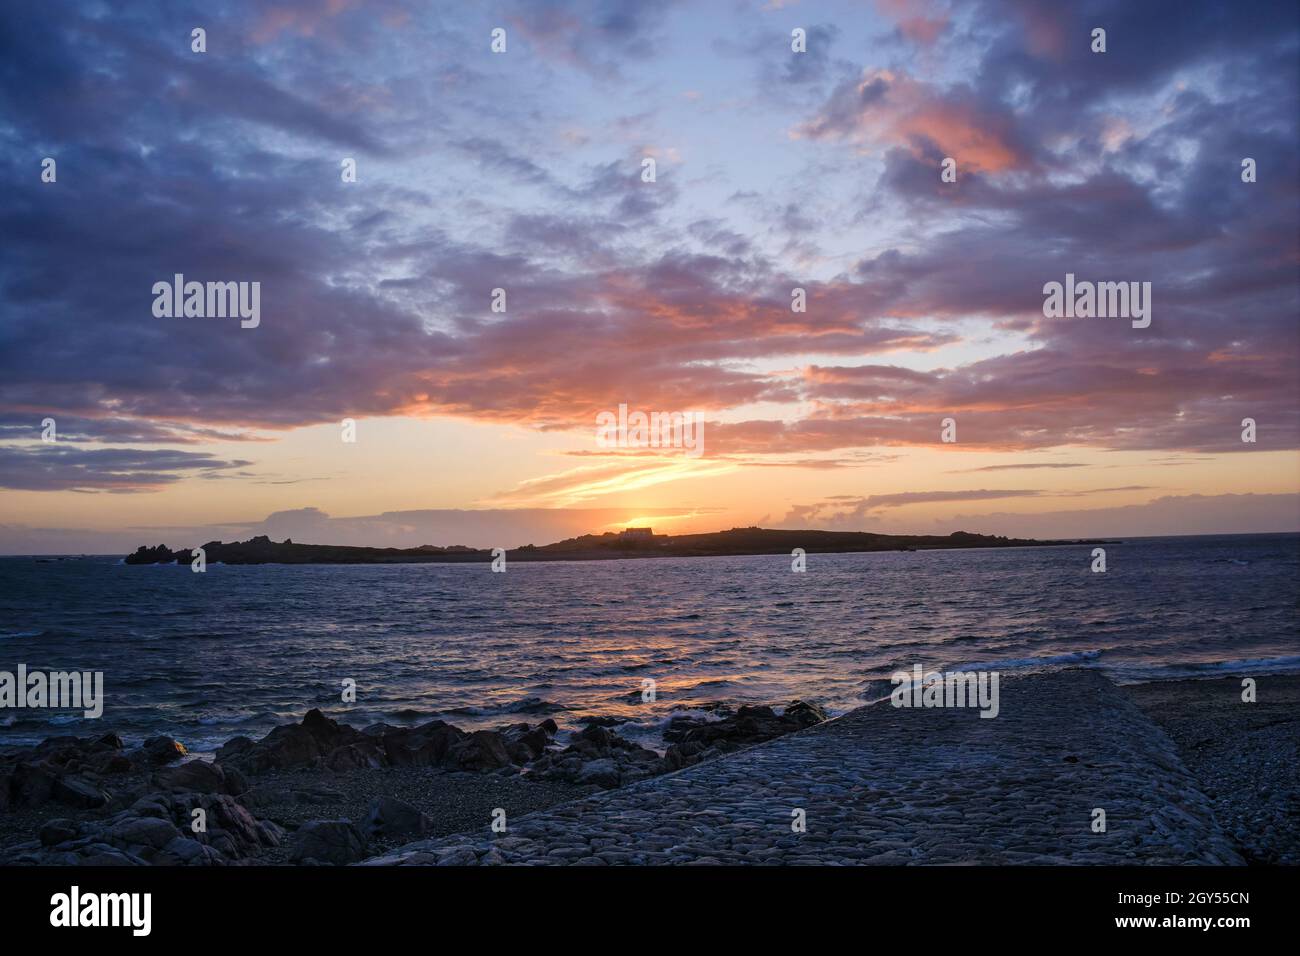 Lihou Island at sunset from L'Erée Headland, Guernsey, Channel Islands00000000000000000000000000000 Stock Photo